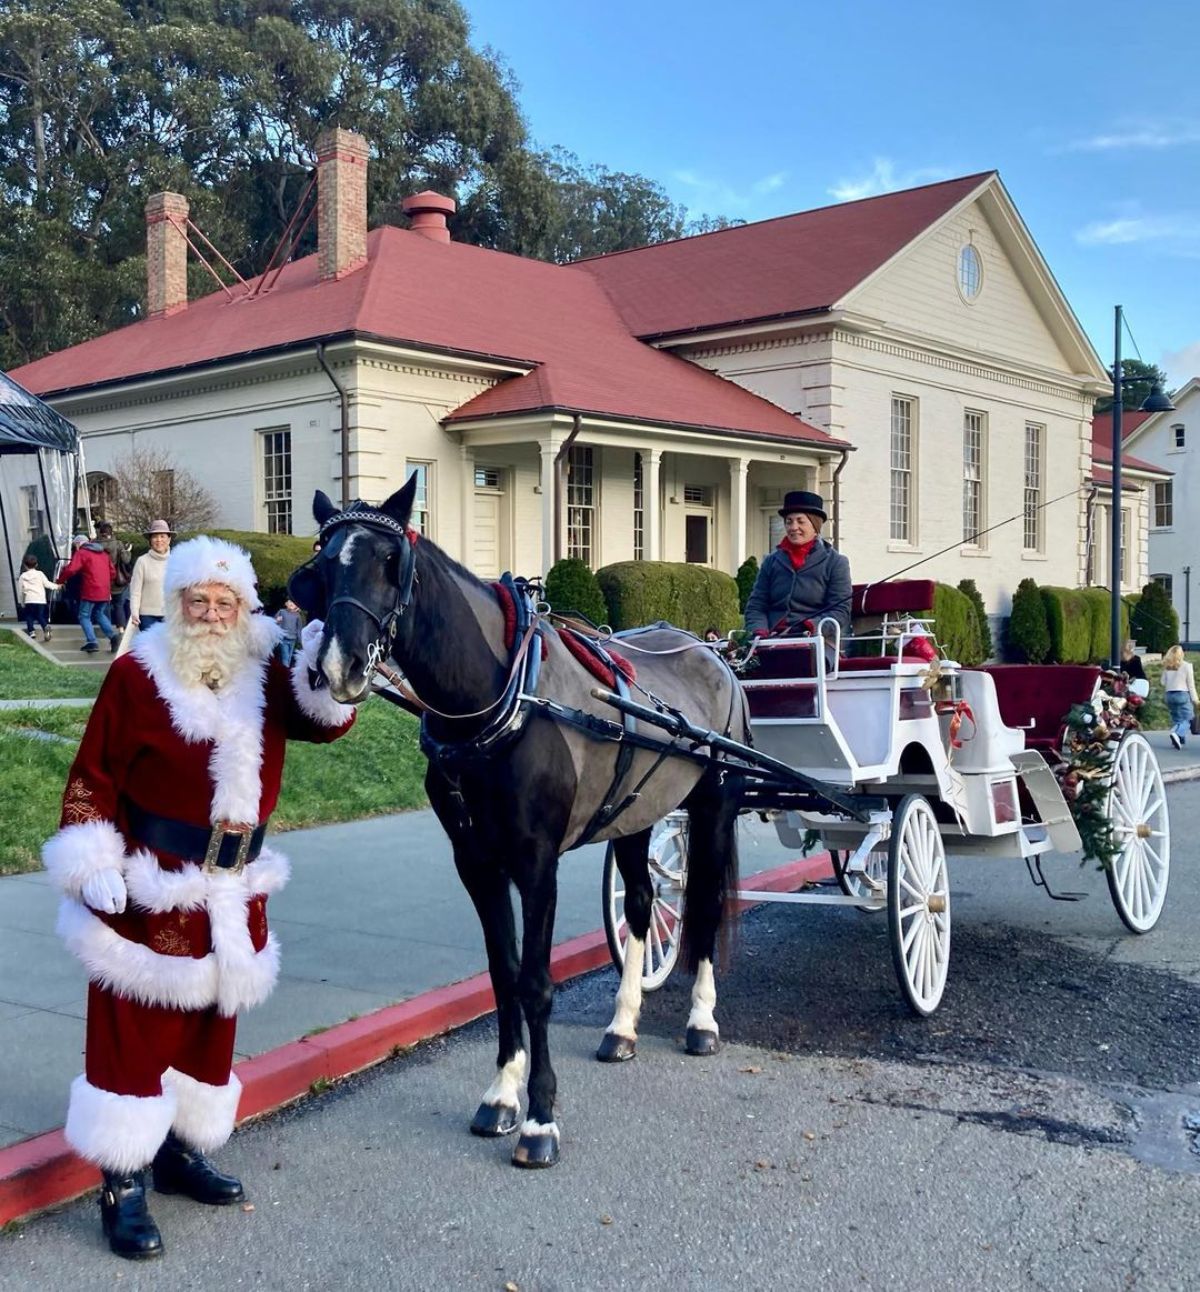 A black Hackney horse with a wagon stands near santa claus.